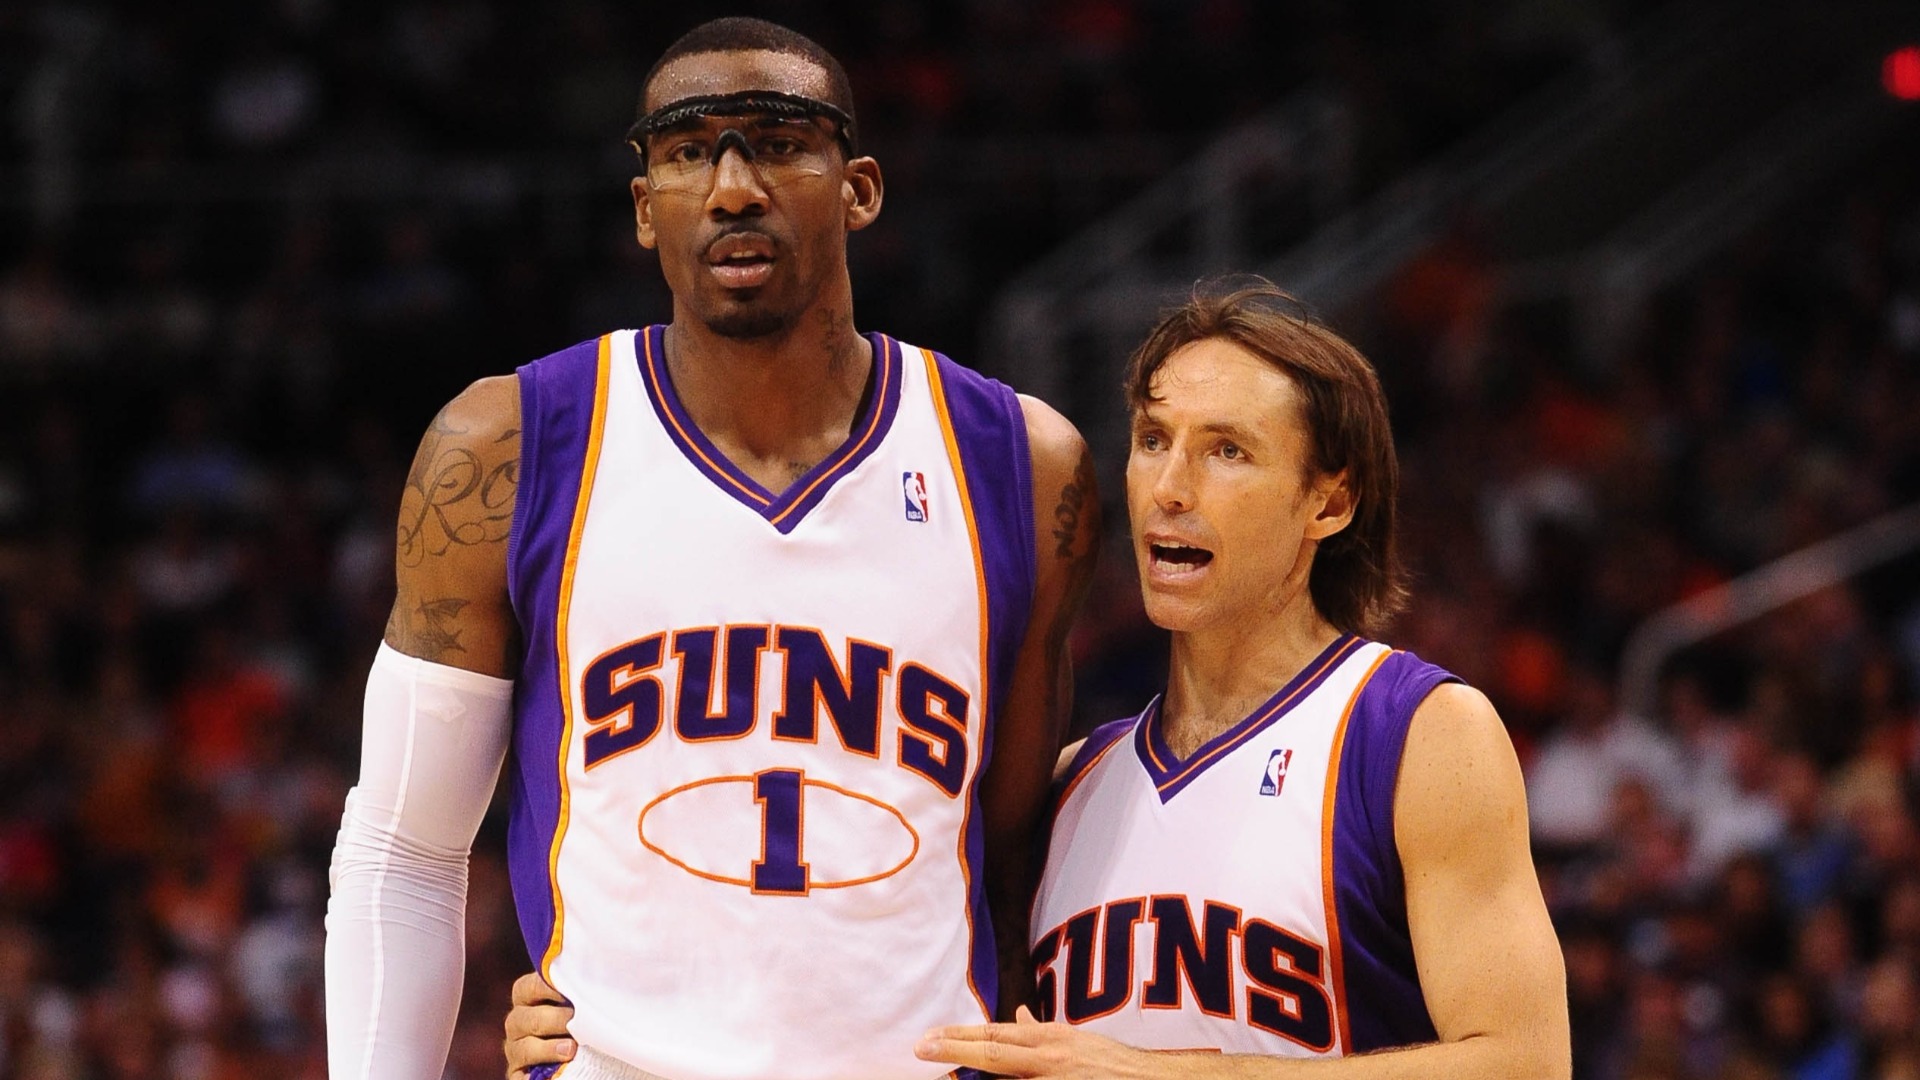 Report: Amar'e Stoudemire to Join Steve Nash's Coaching Staff With Nets